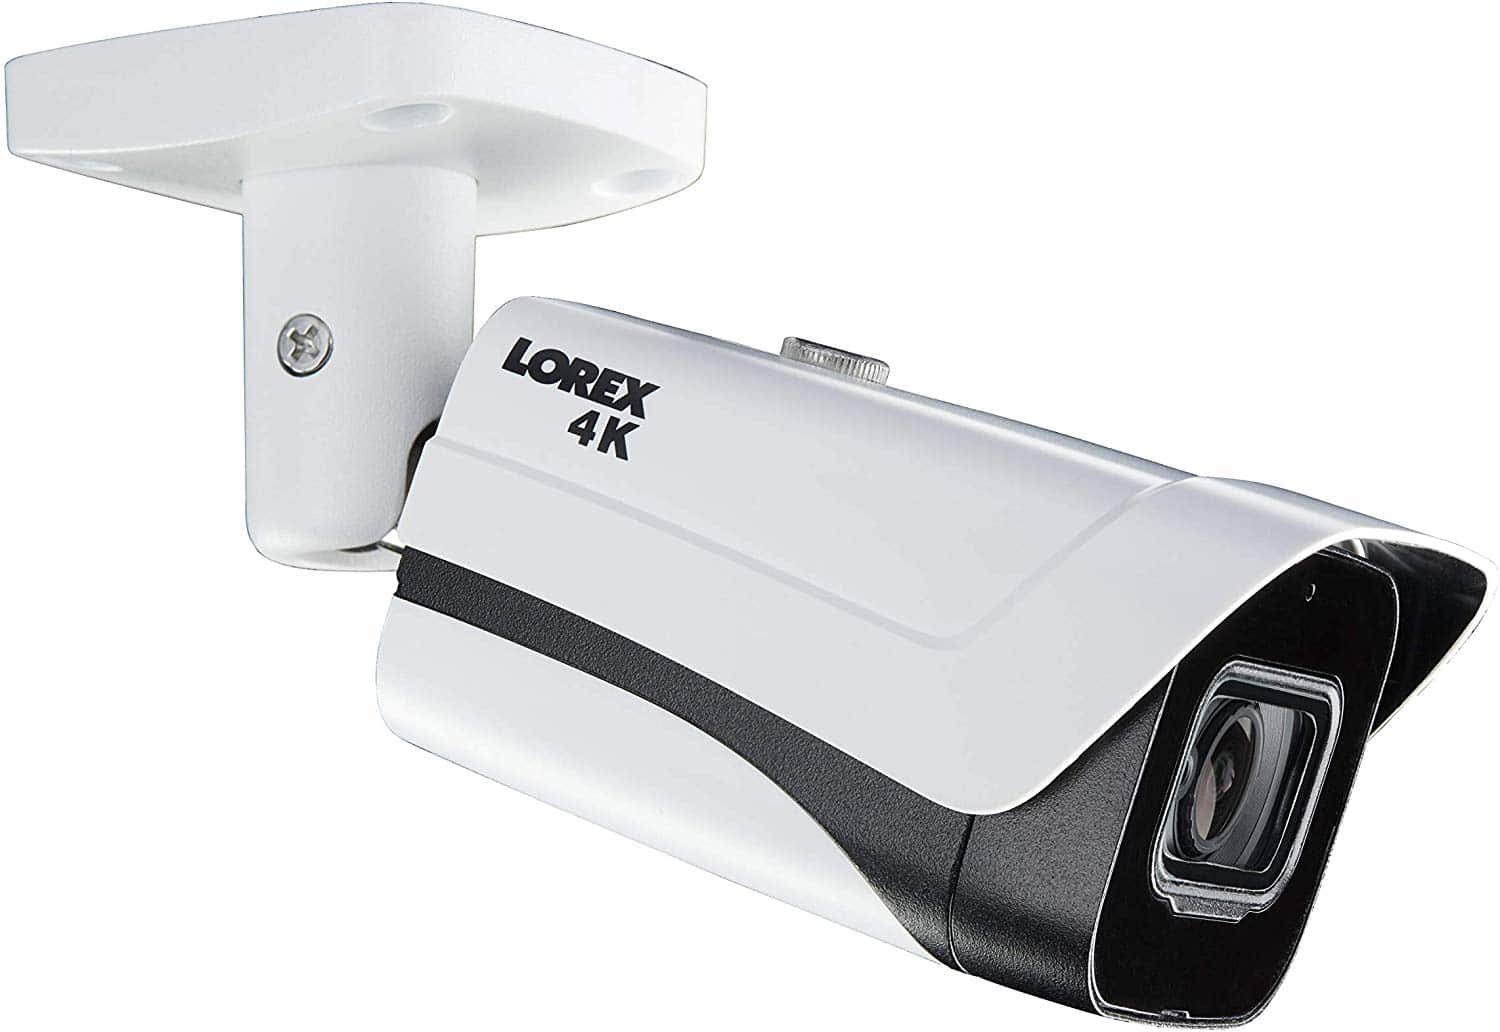 Lorex Weatherproof Indoor/Outdoor 4K Ultra HD Security Camera w/Long Range Color Night Vision and Wide Field of View